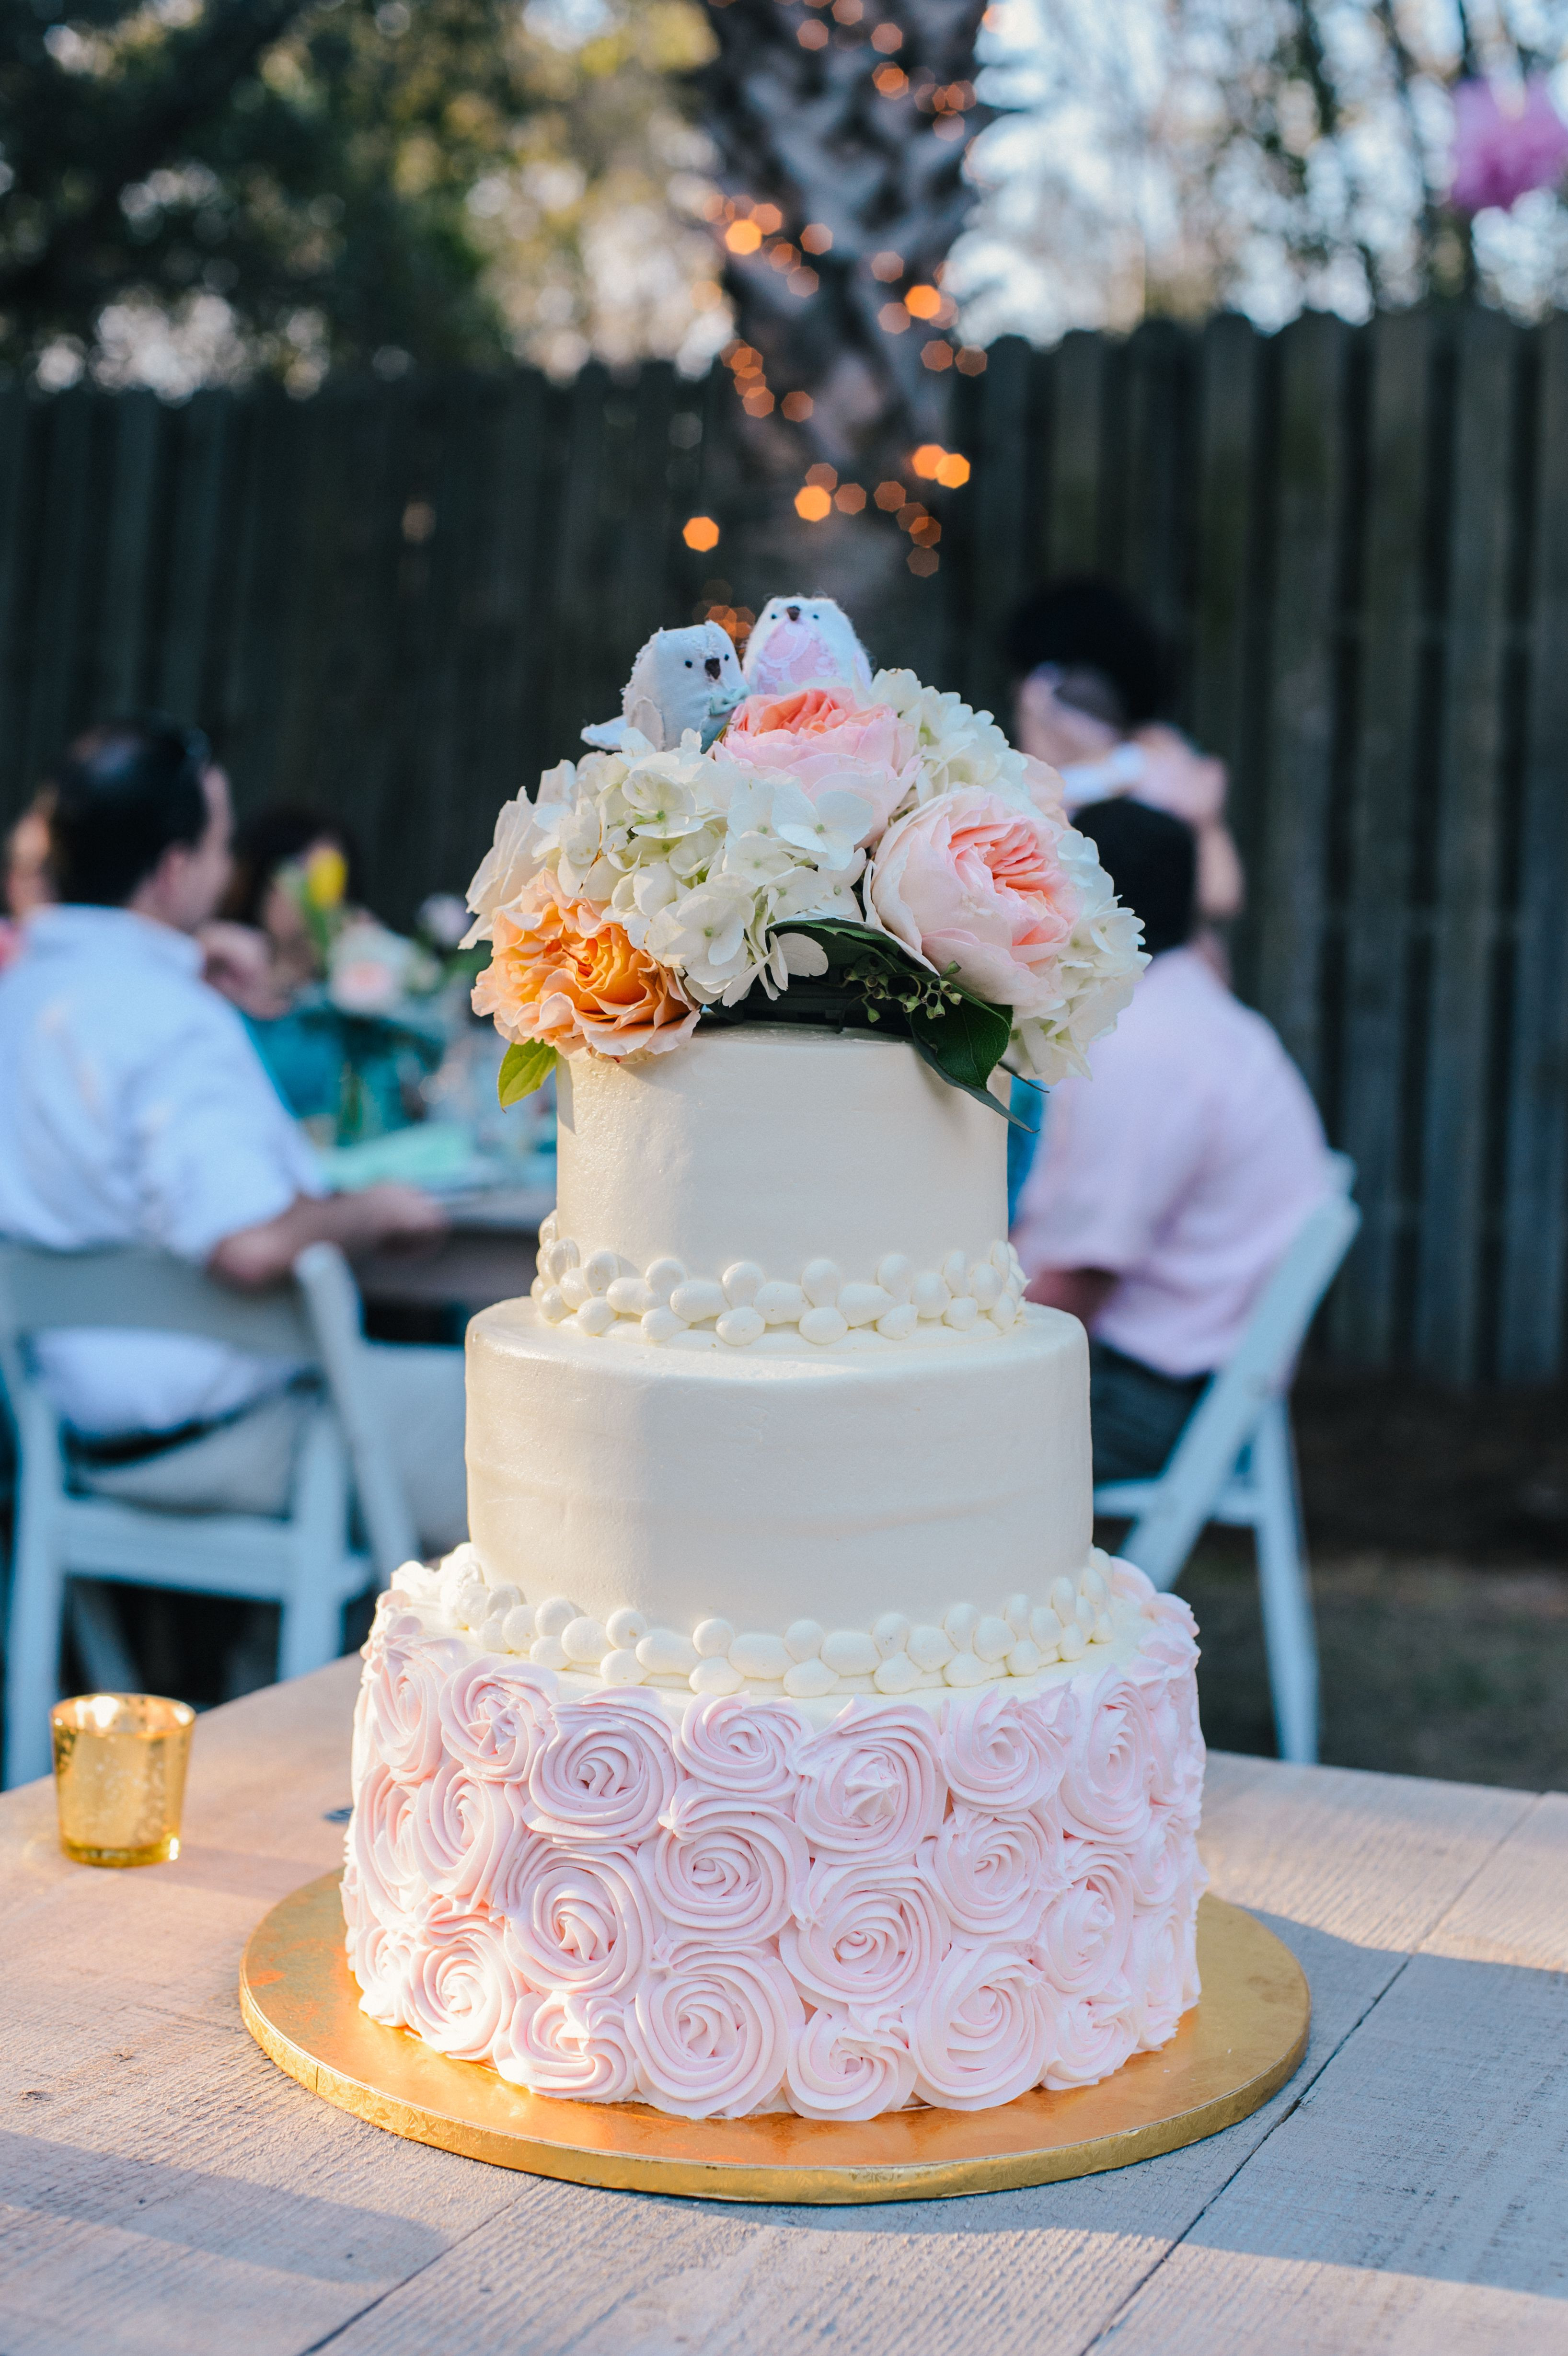 Wedding Cakes Melbourne Fl
 Pink rosetta wedding cake with love birds and peonies